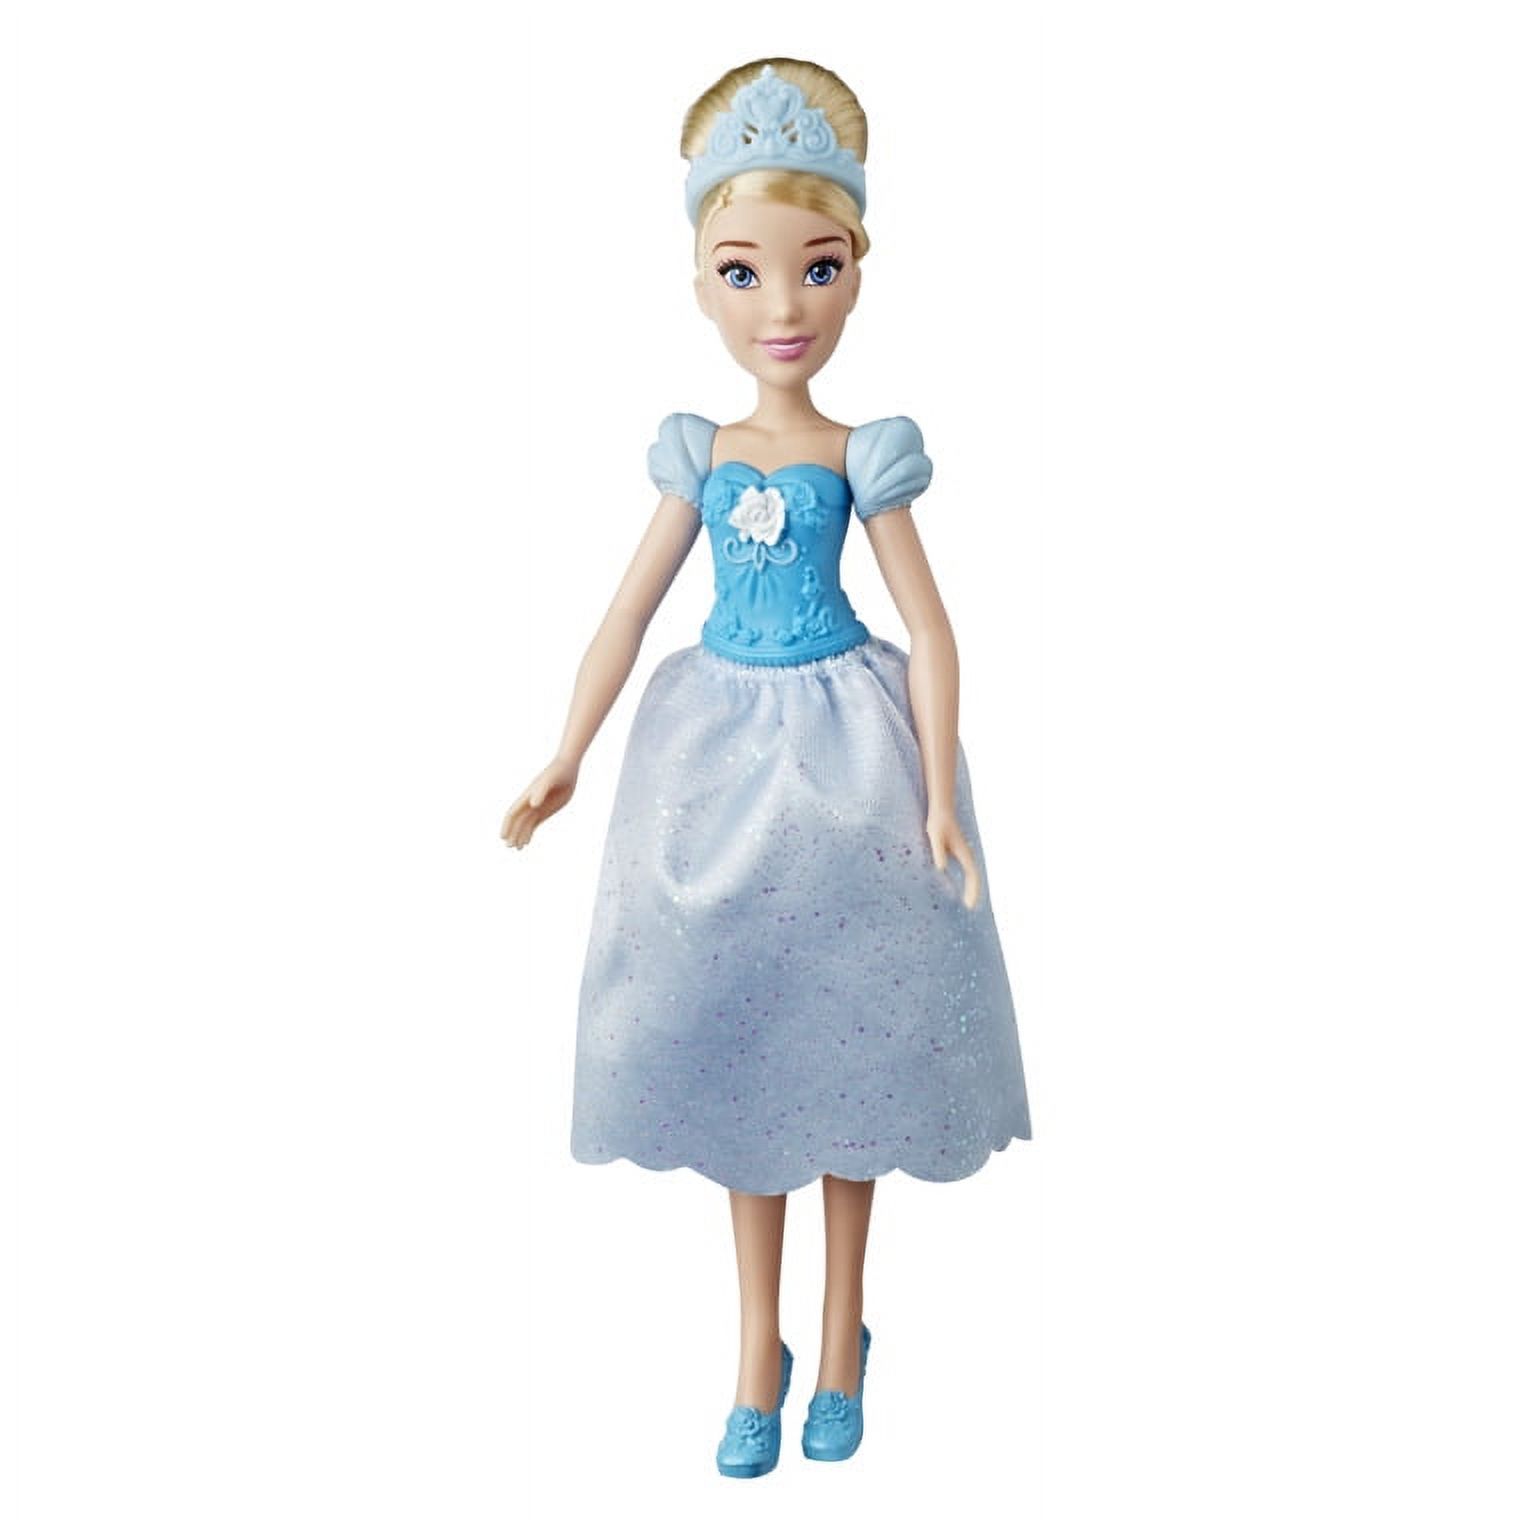 Disney Princess Cinderella Fashion Doll, for Kids Ages 3 and Up - image 1 of 4